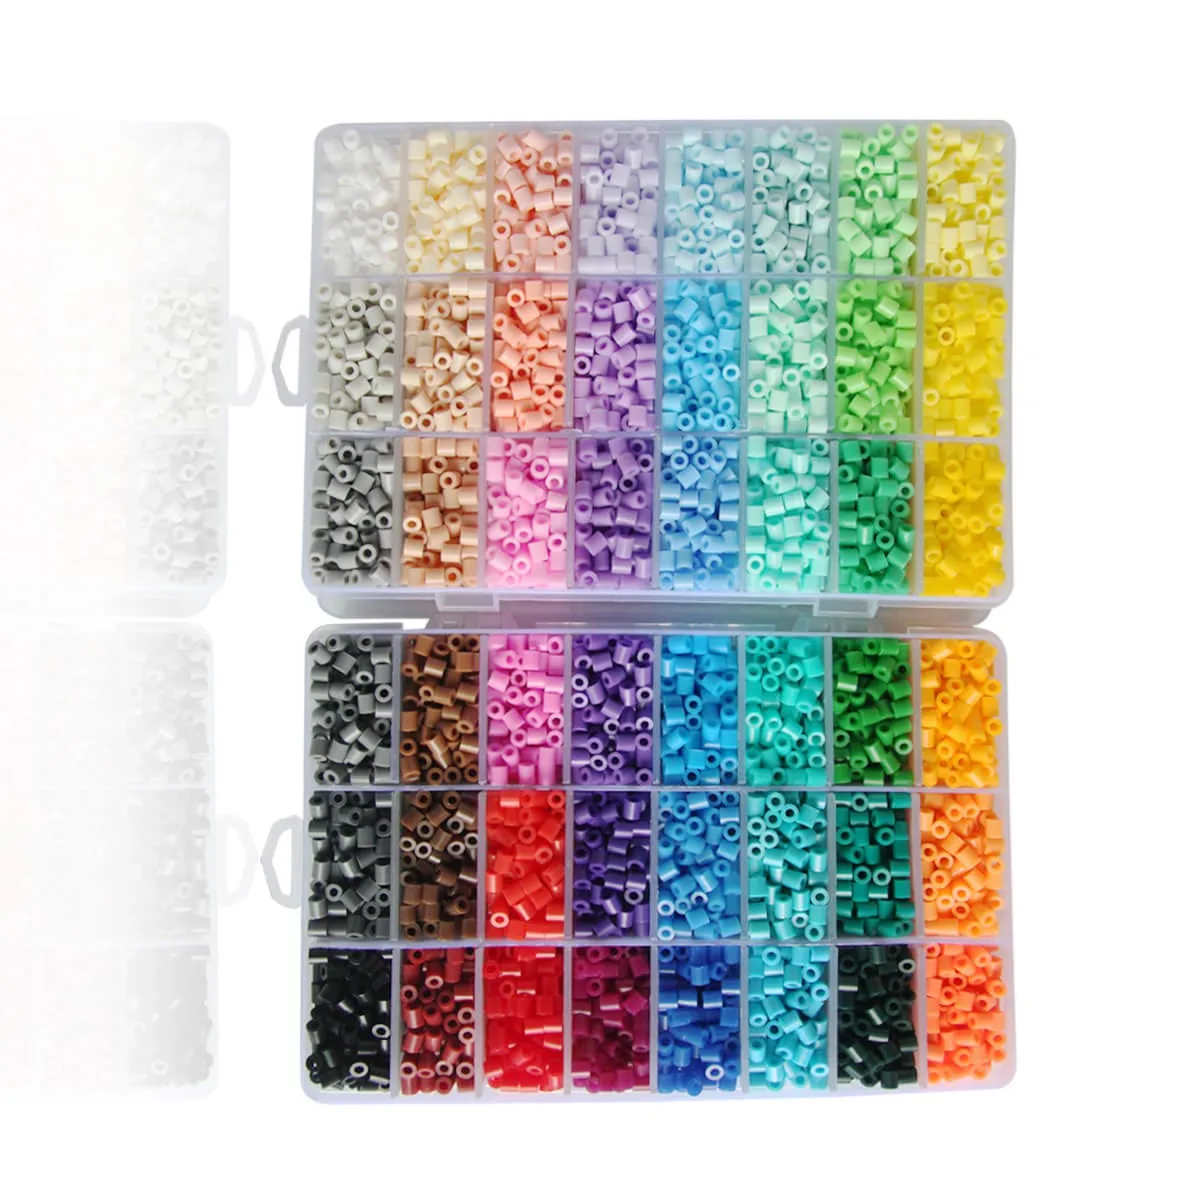 Pack Perler beads 5mm 48 Colores 10.400+2000 Beads Artkal/hama